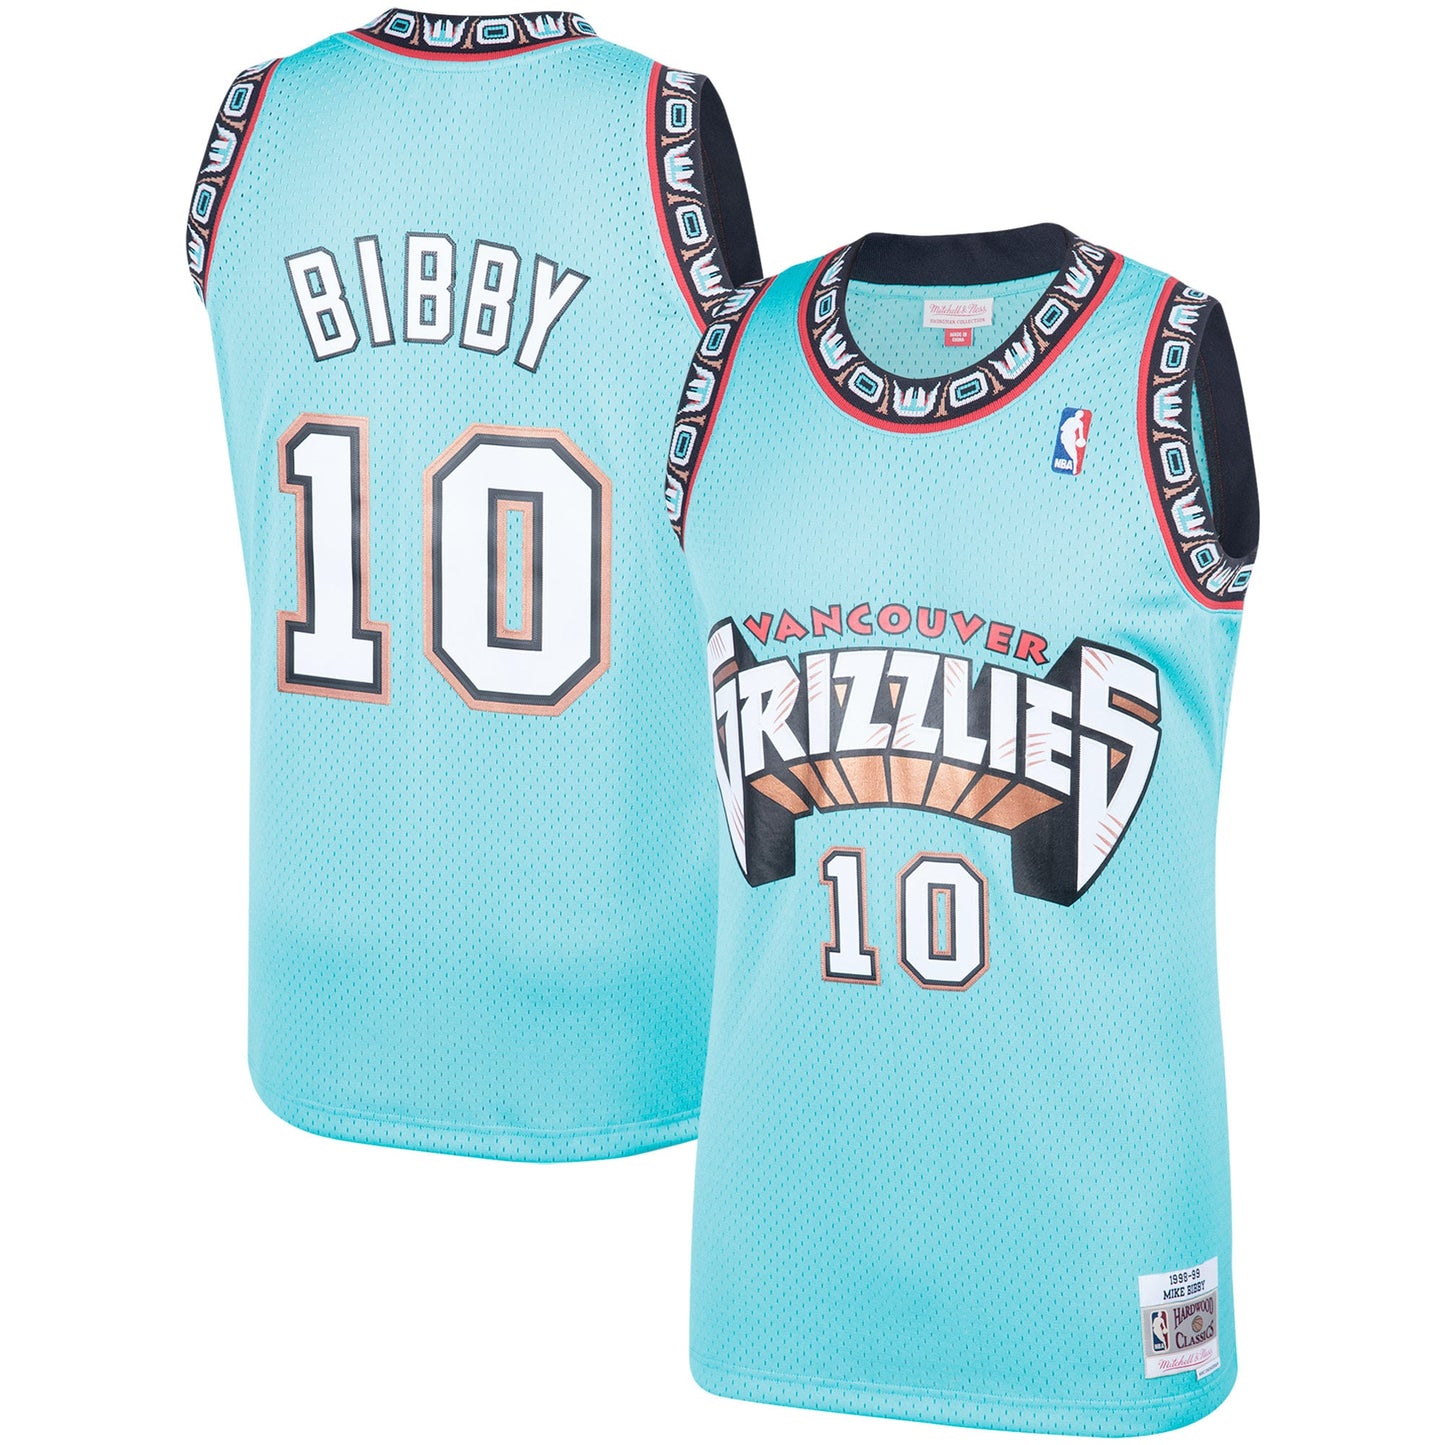 Mitchell and Ness Mike Bibby Vancouver Grizzlies 1998-99 Swingman Jersey Red